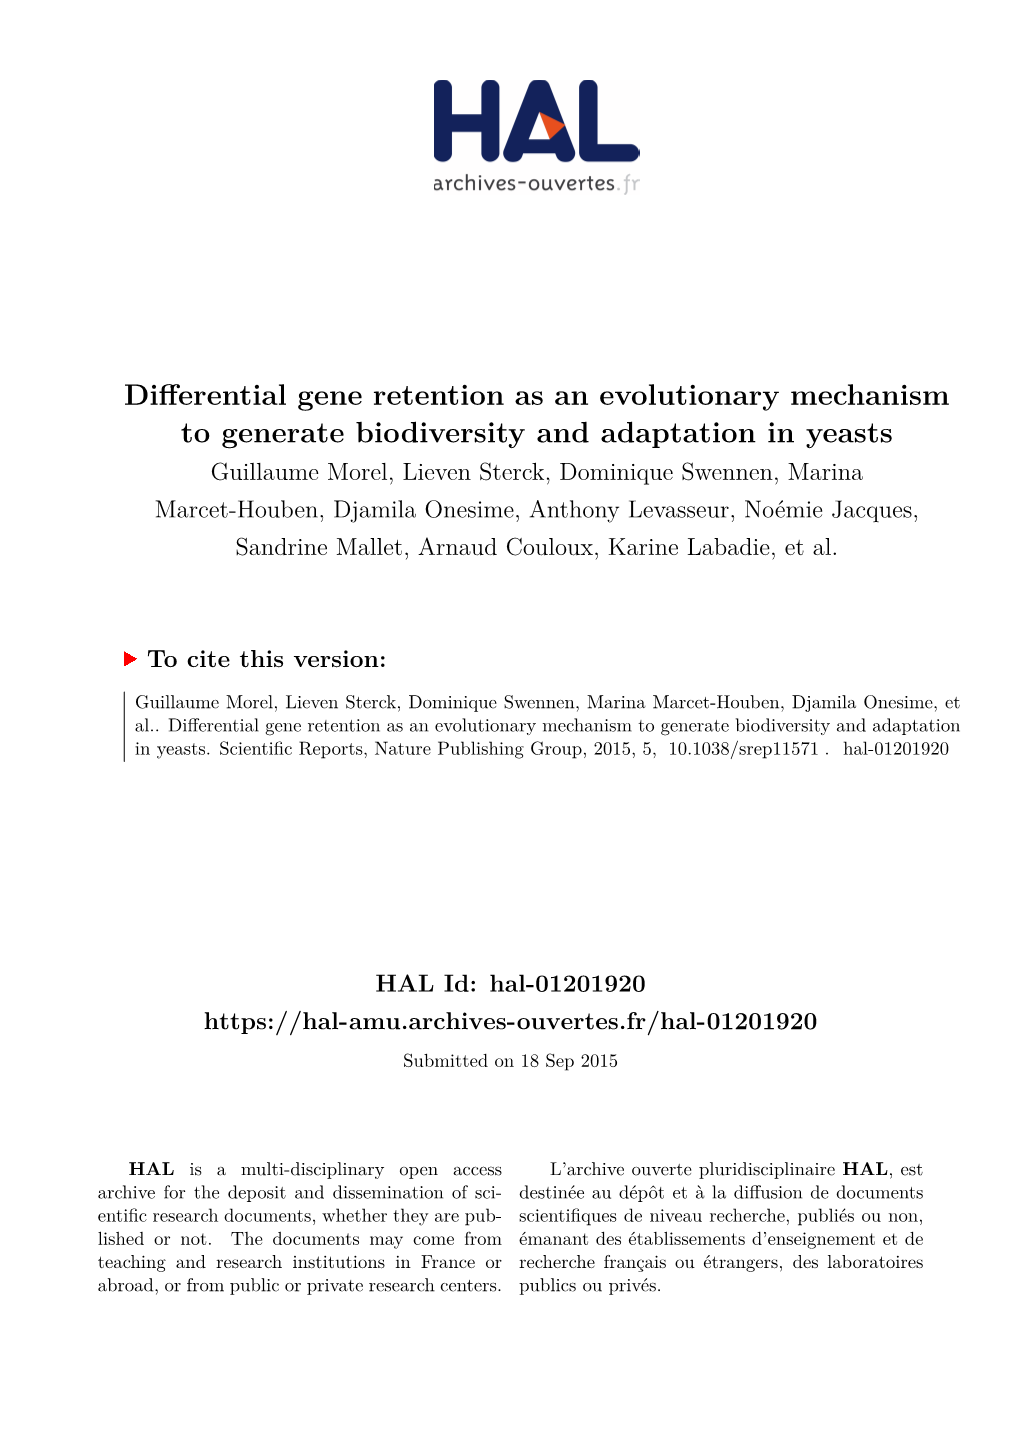 Differential Gene Retention As an Evolutionary Mechanism To